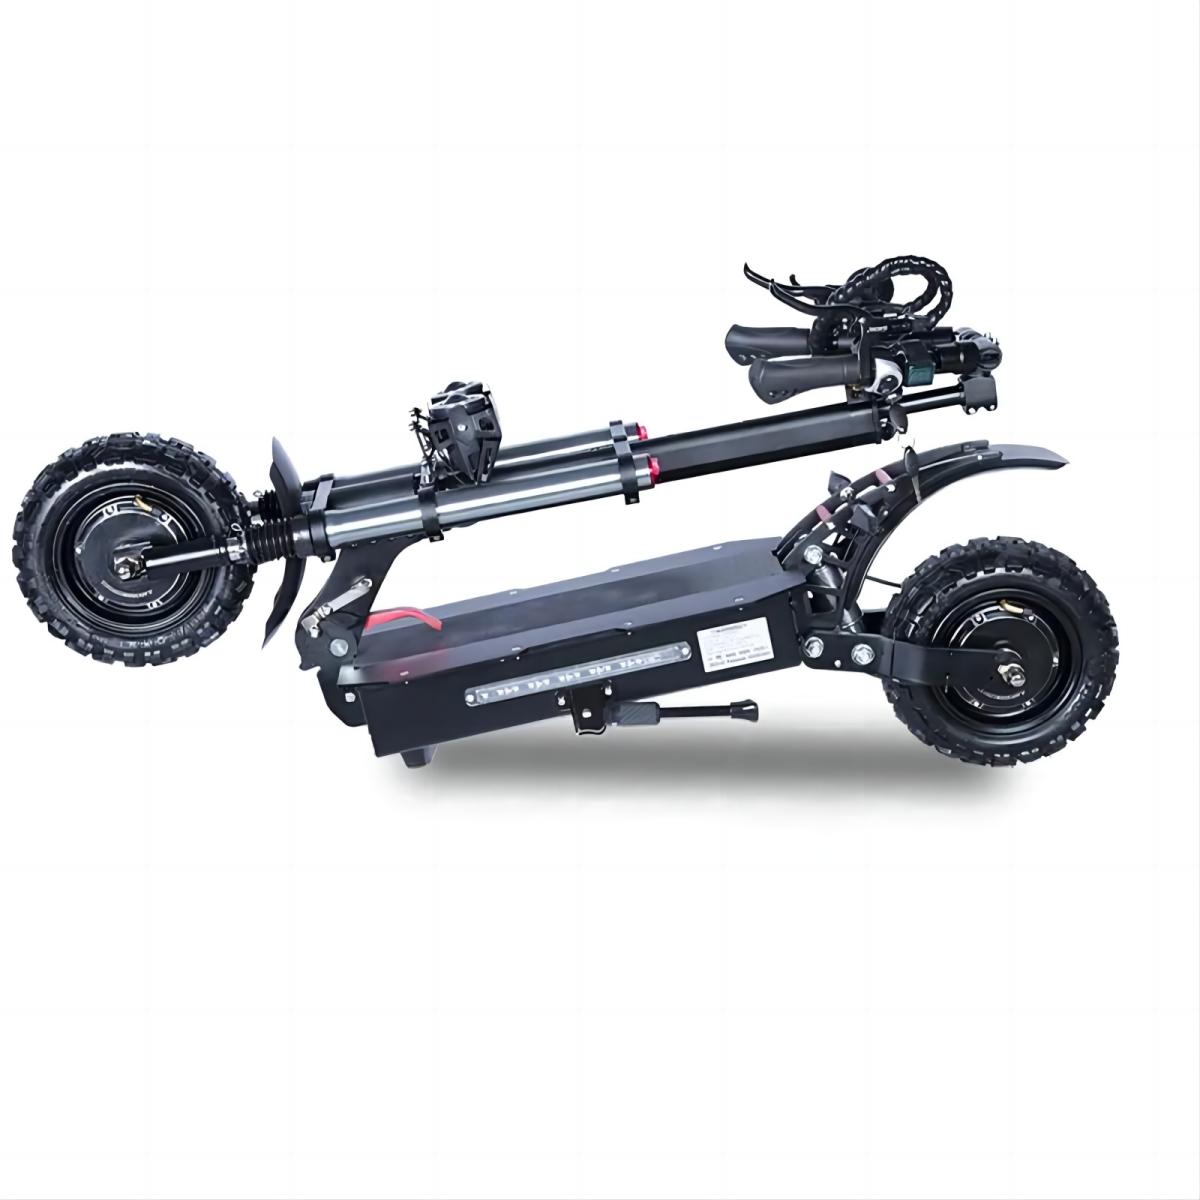 TOURSOR E5B 11" Folding Electric Scooter with Seat 2800W*2 Dual Motors 60V 35Ah Battery